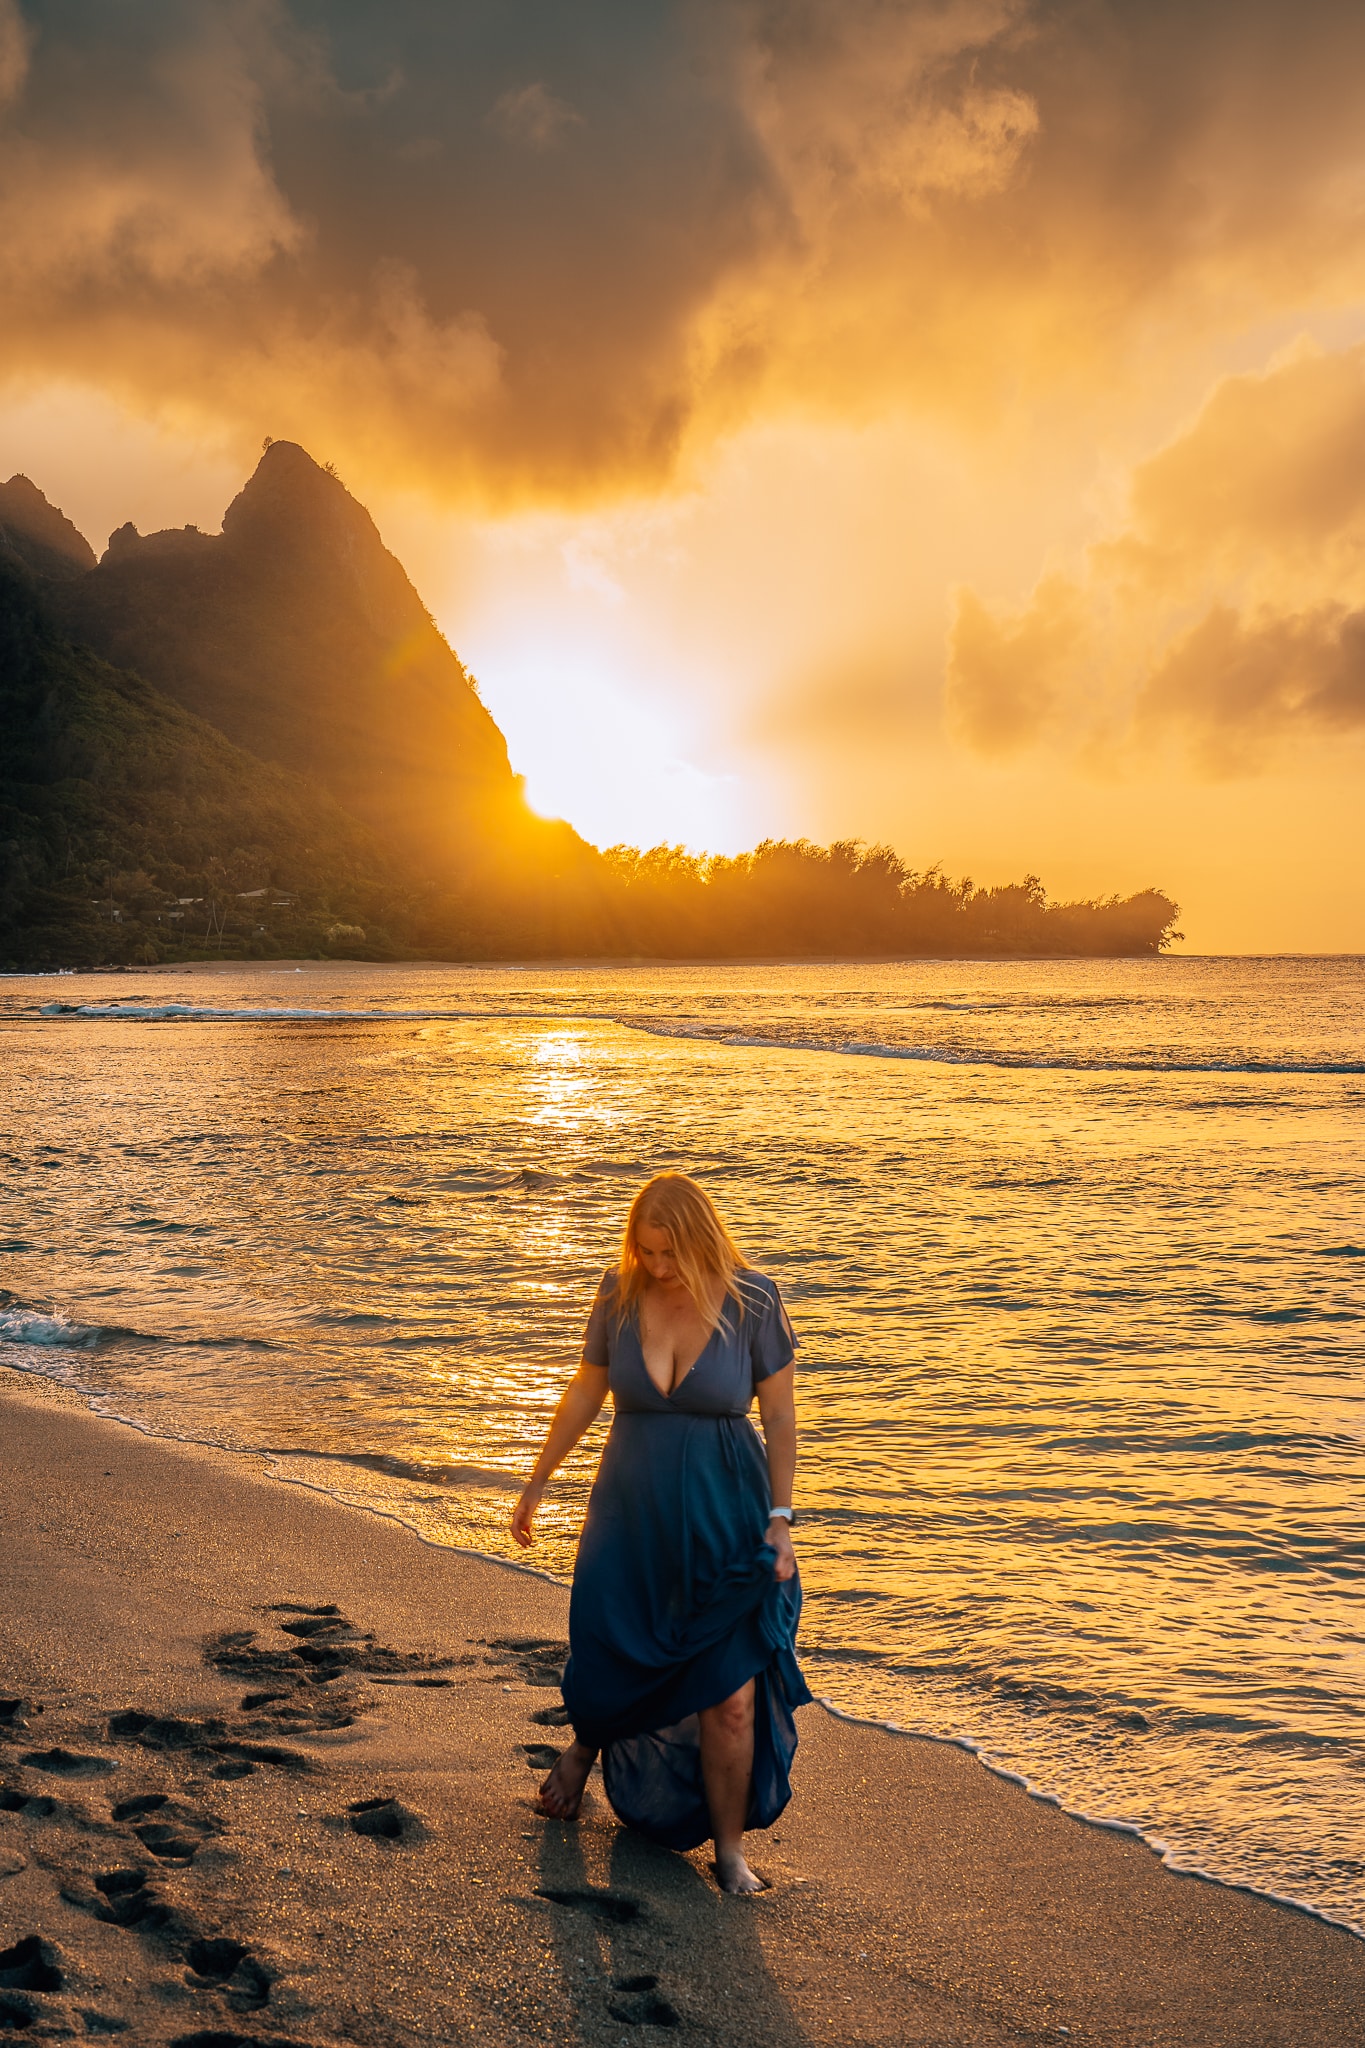 Woman standing on a beach in Kauai with the sun setting behind the mountain in the background